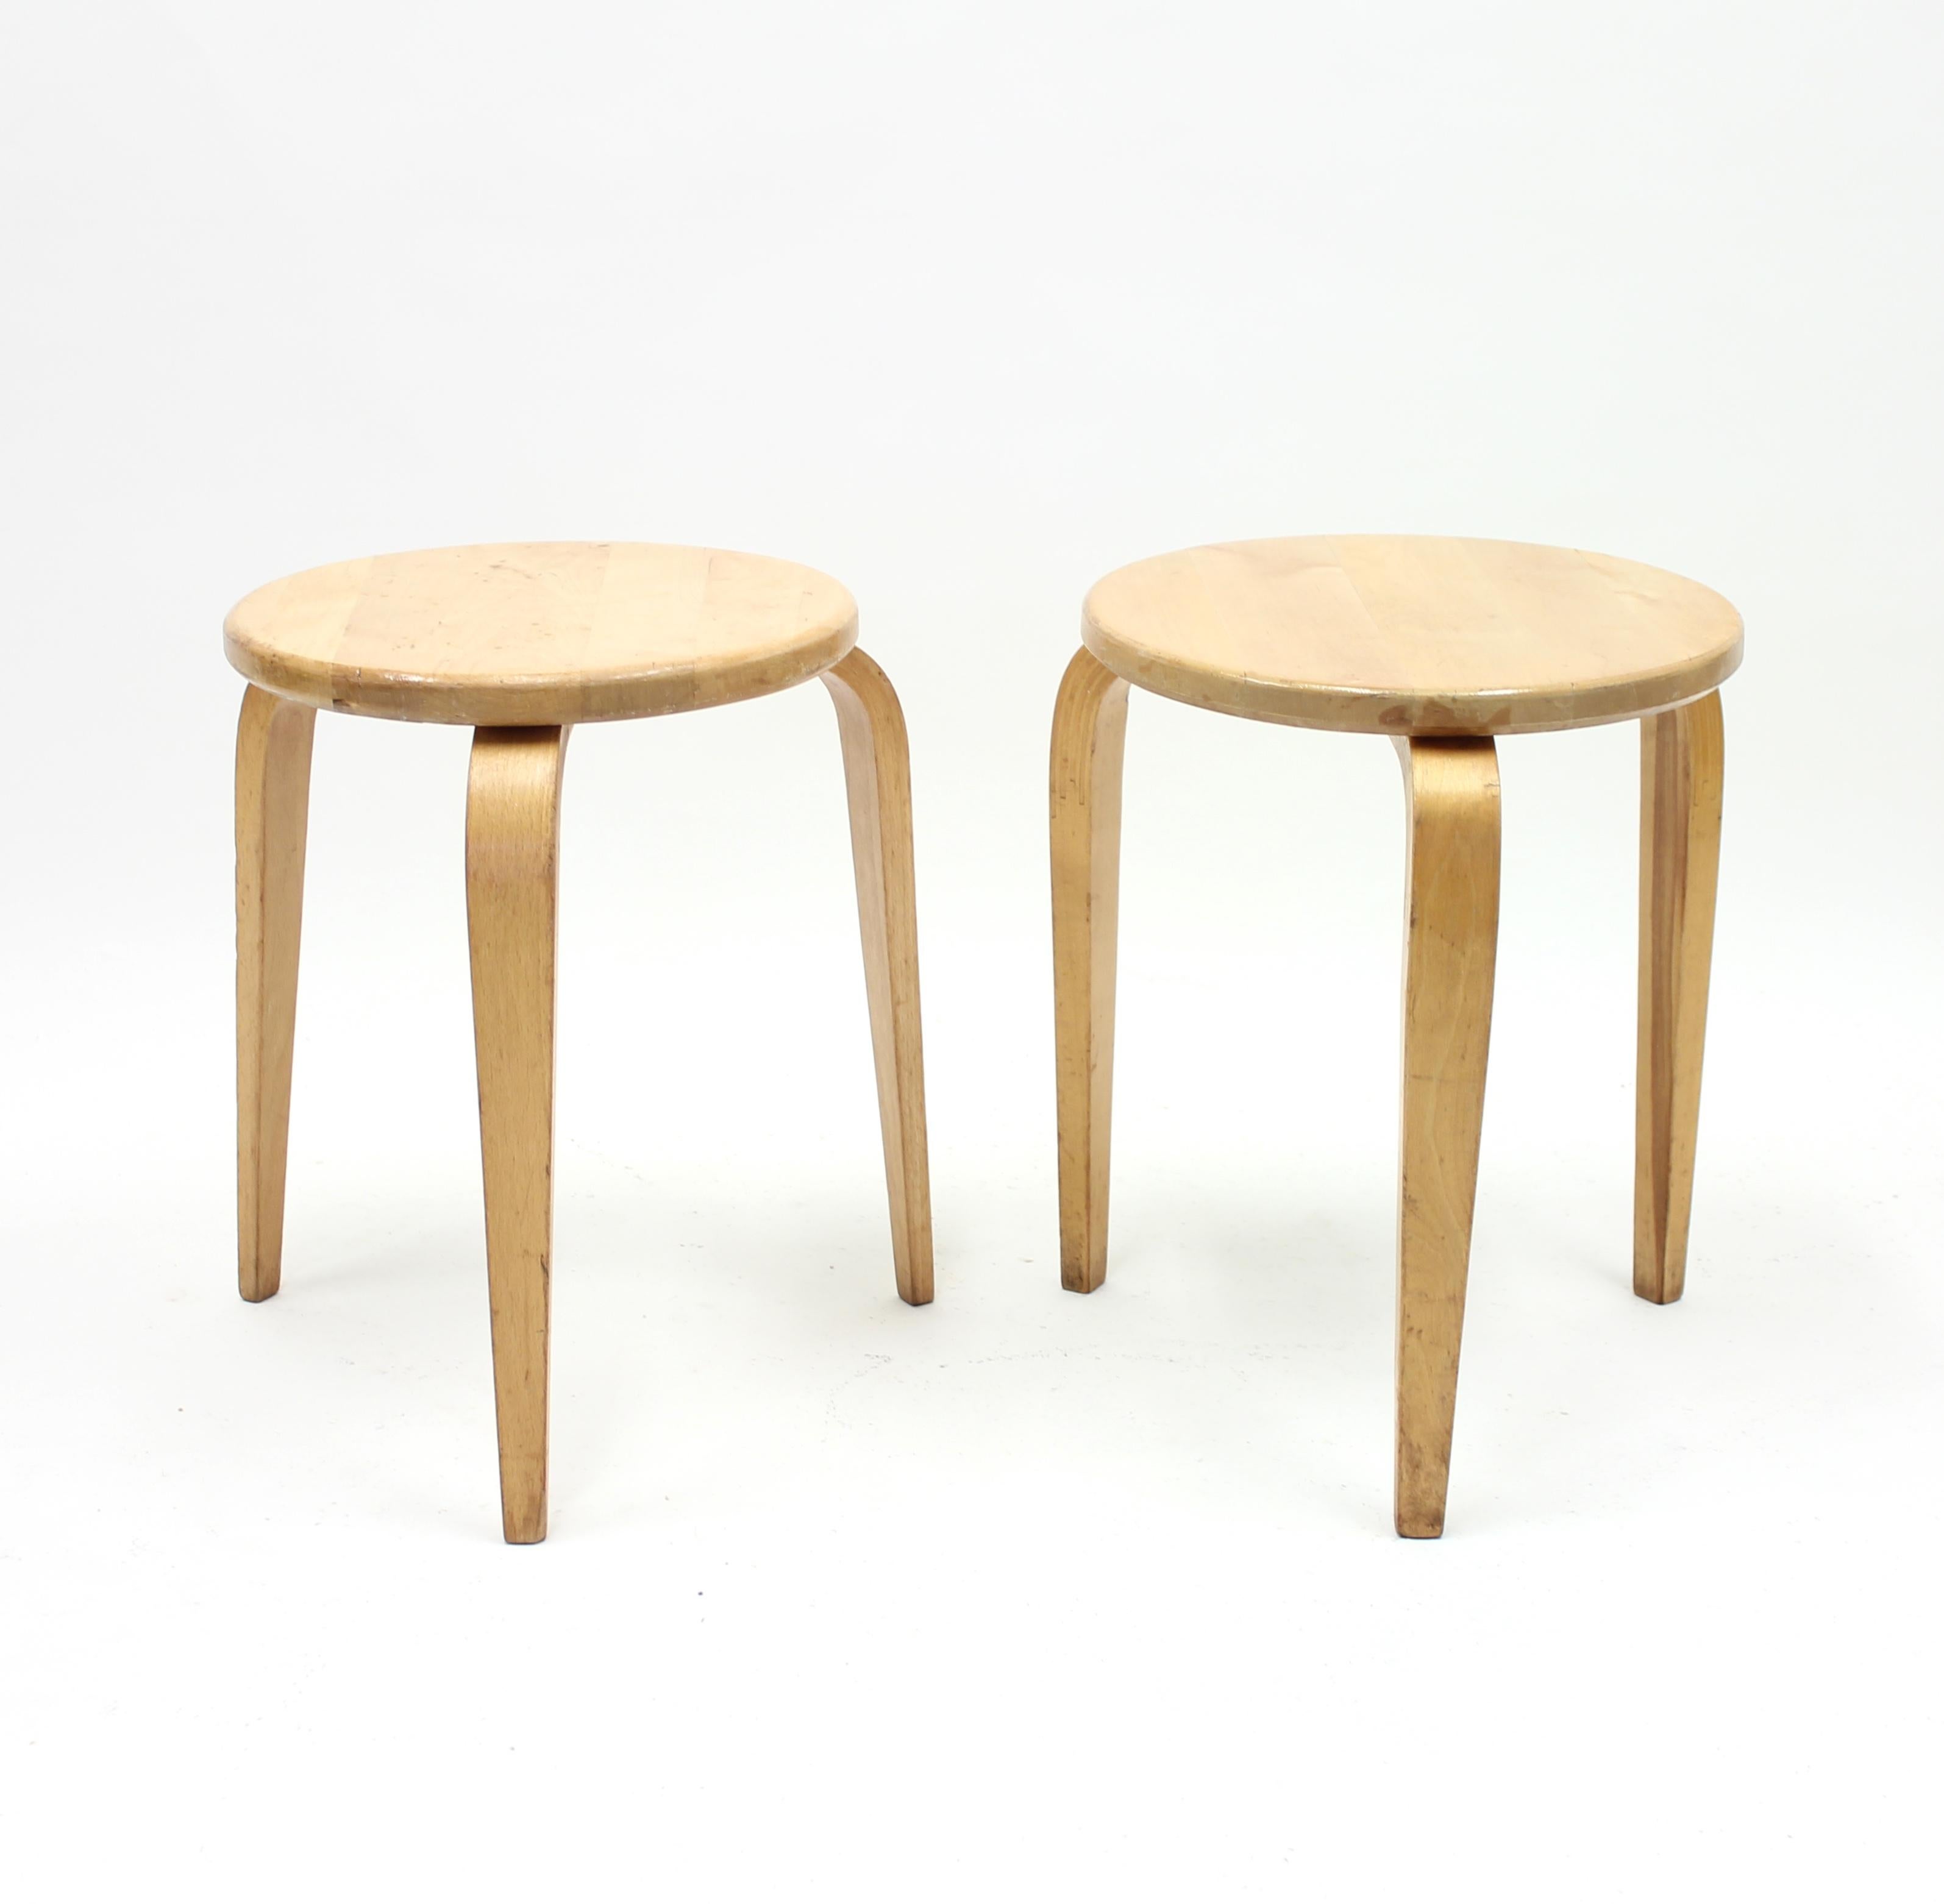 Pair of stools designed by Swedish modernist G.A. (Gustaf Axel) Berg in the 1940s. They of course have some resemblance with the very famous Alvar Aalto stool, model 60. Berg actually had a his own furniture shop in Stockholm in the early 1940s and